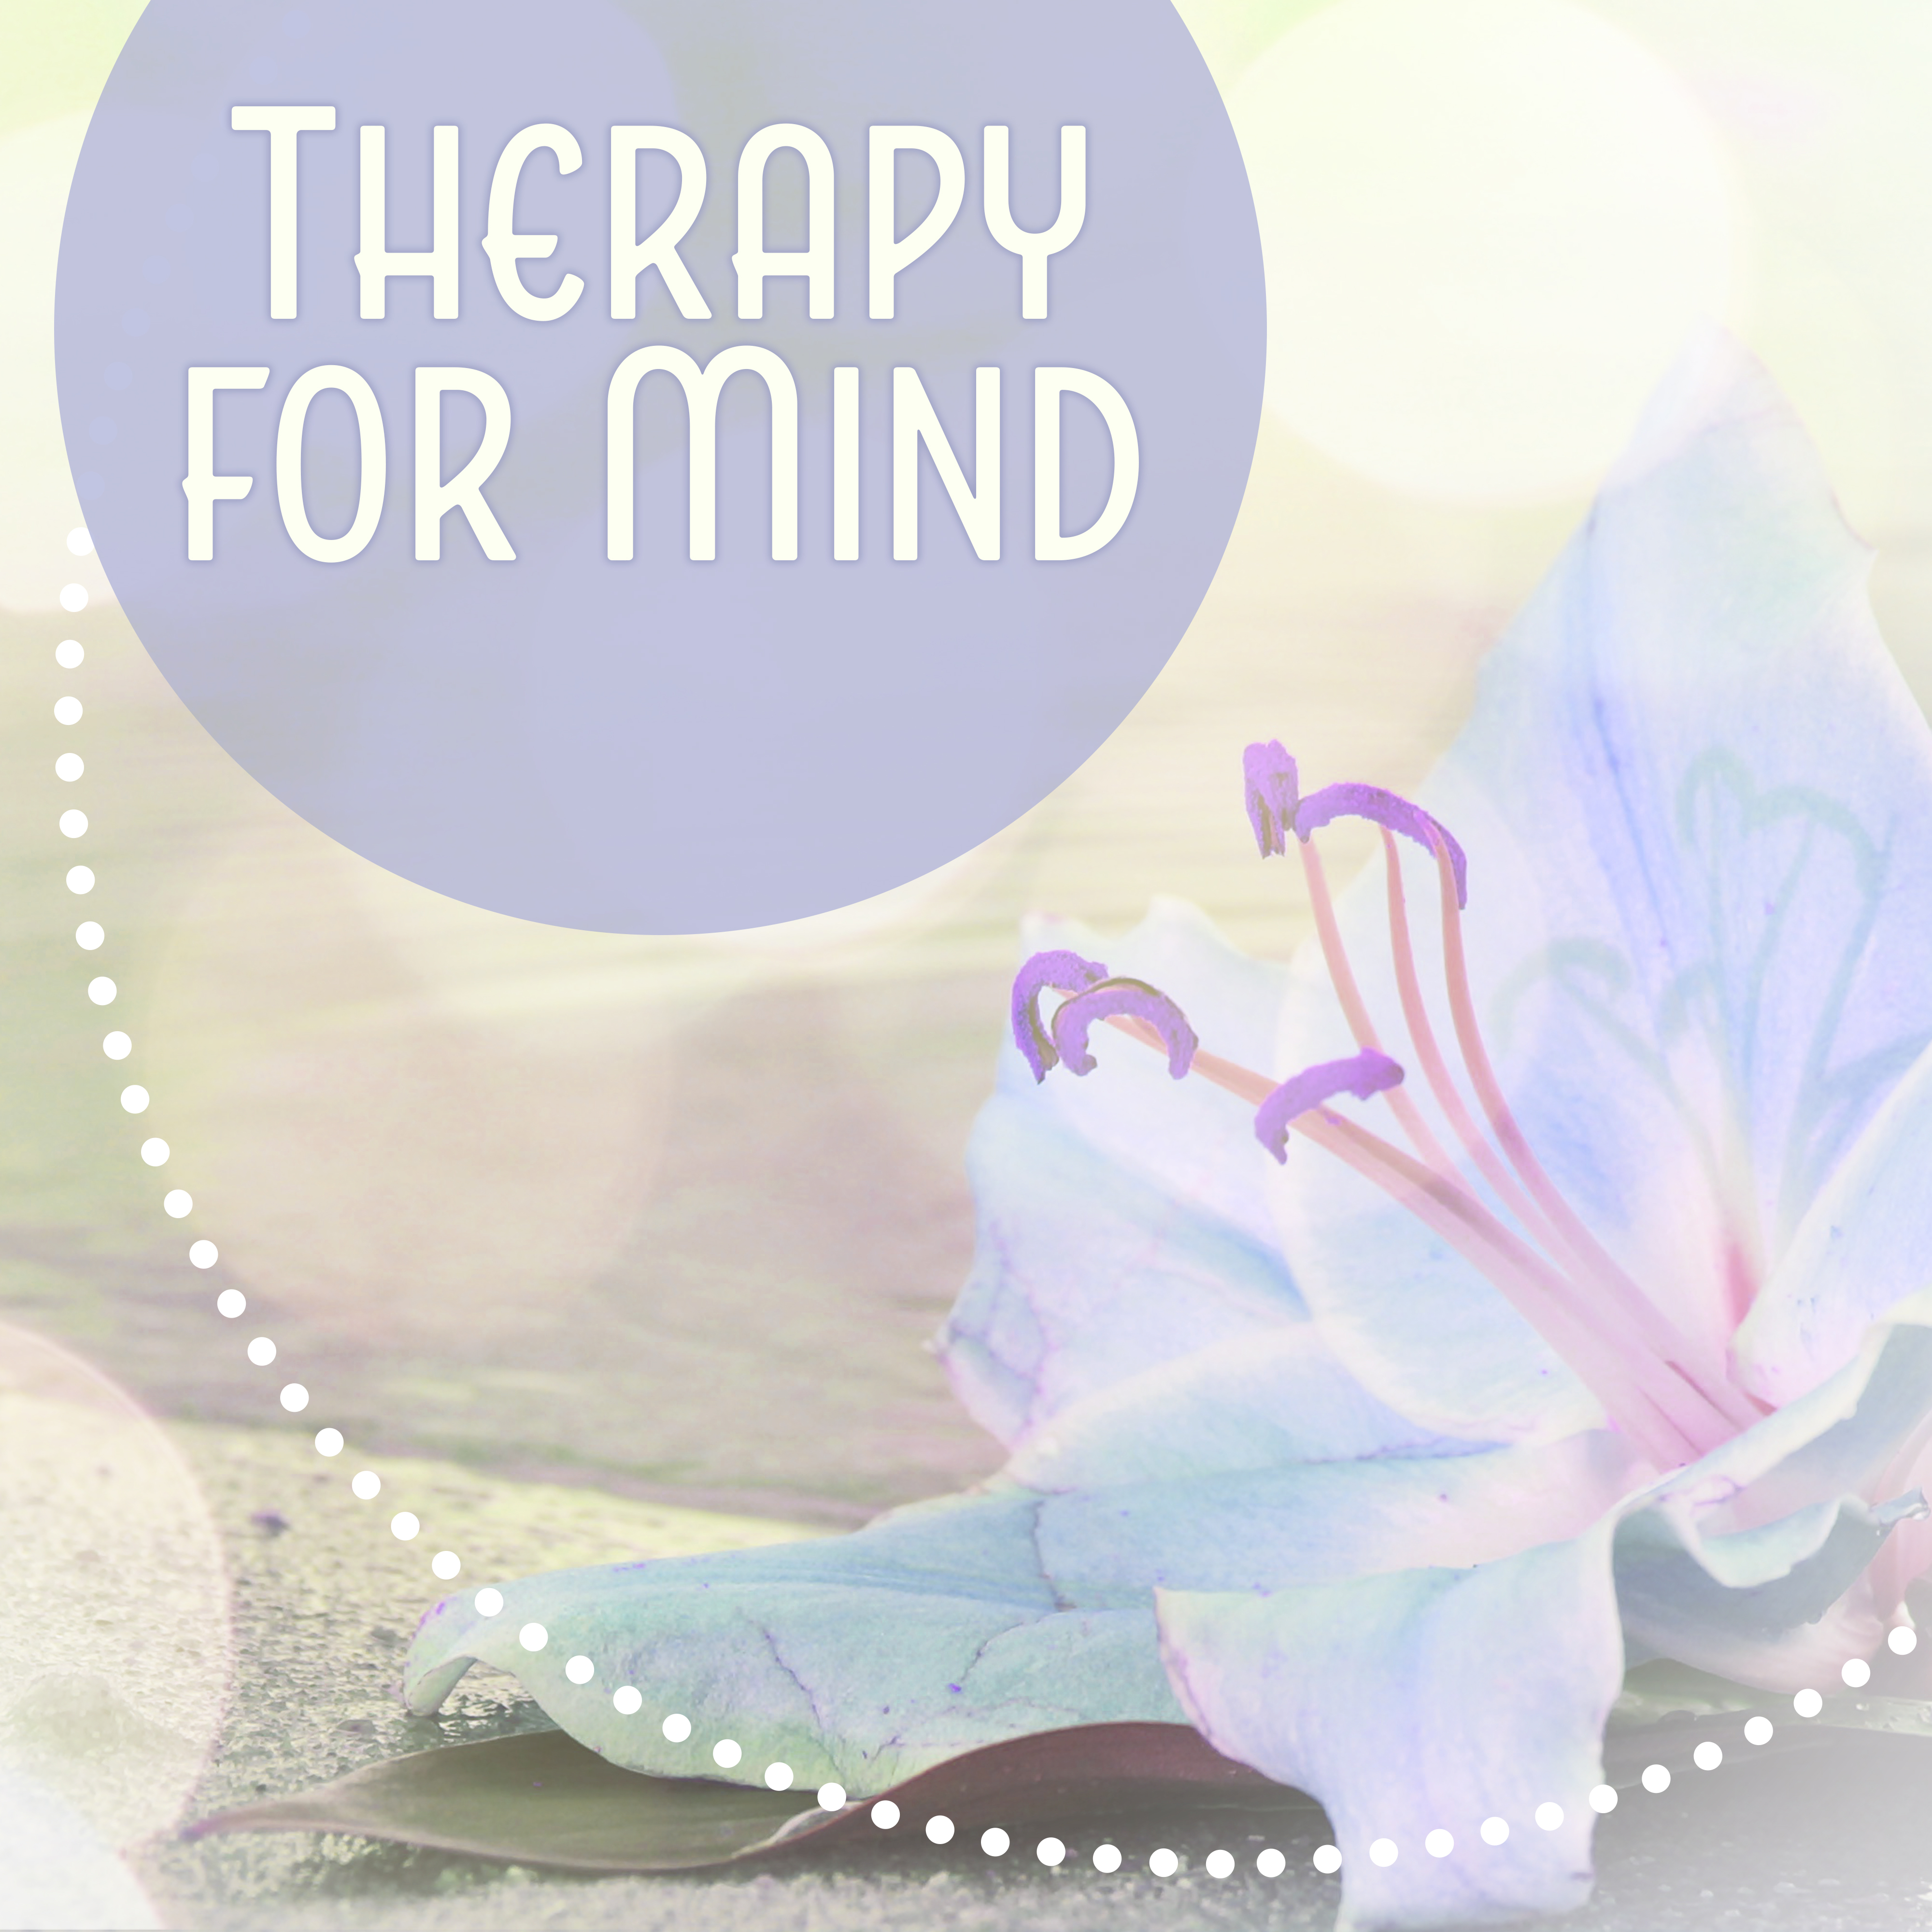 Therapy for Mind – Soft Nature Sounds for Wellness, Massage, Spa Dreams, Relaxing Waves, Nature Music, Stress Relief, Pure Spa